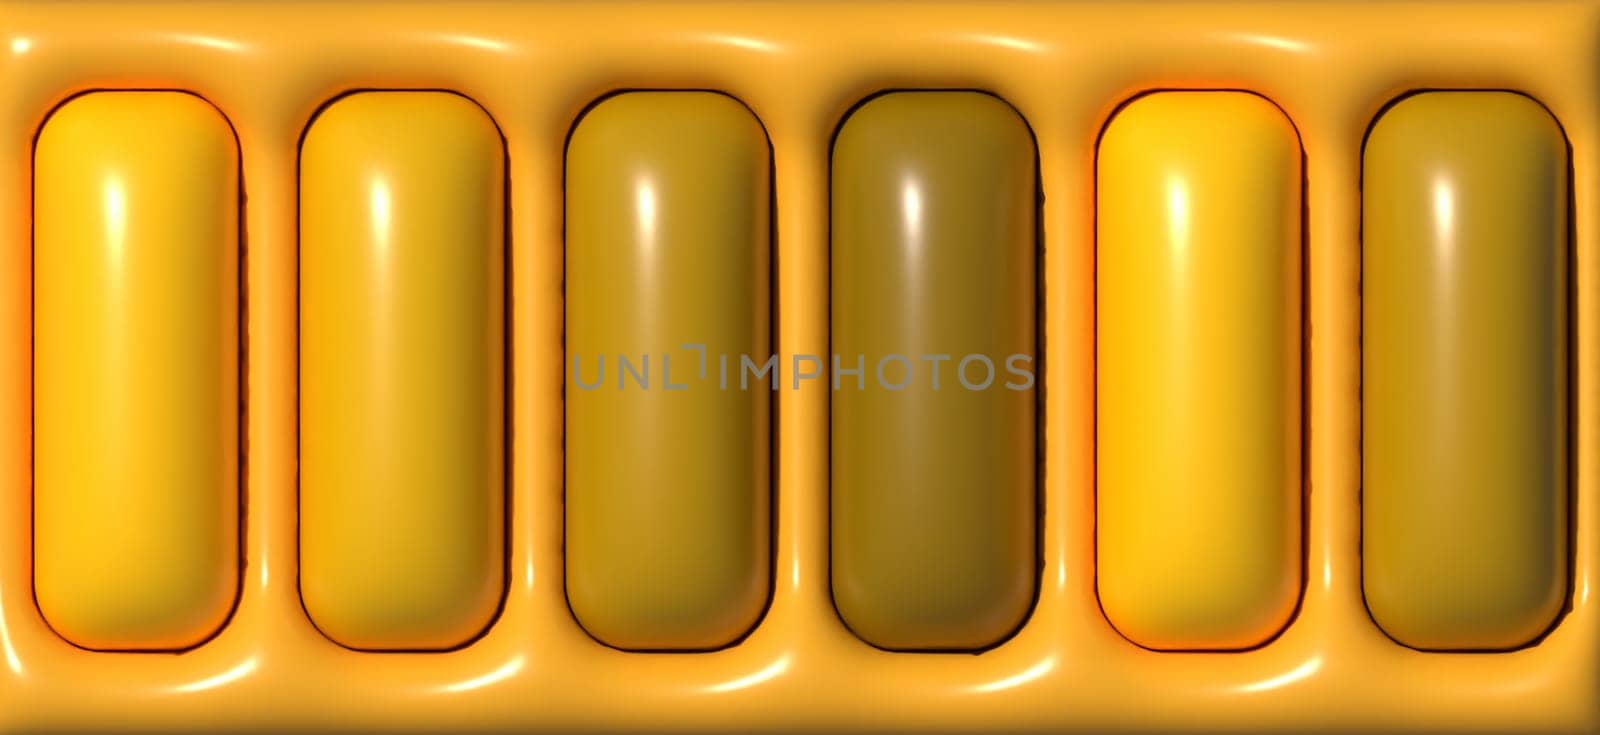 Inflated yellow lines with a shiny surface, 3D rendering illustration